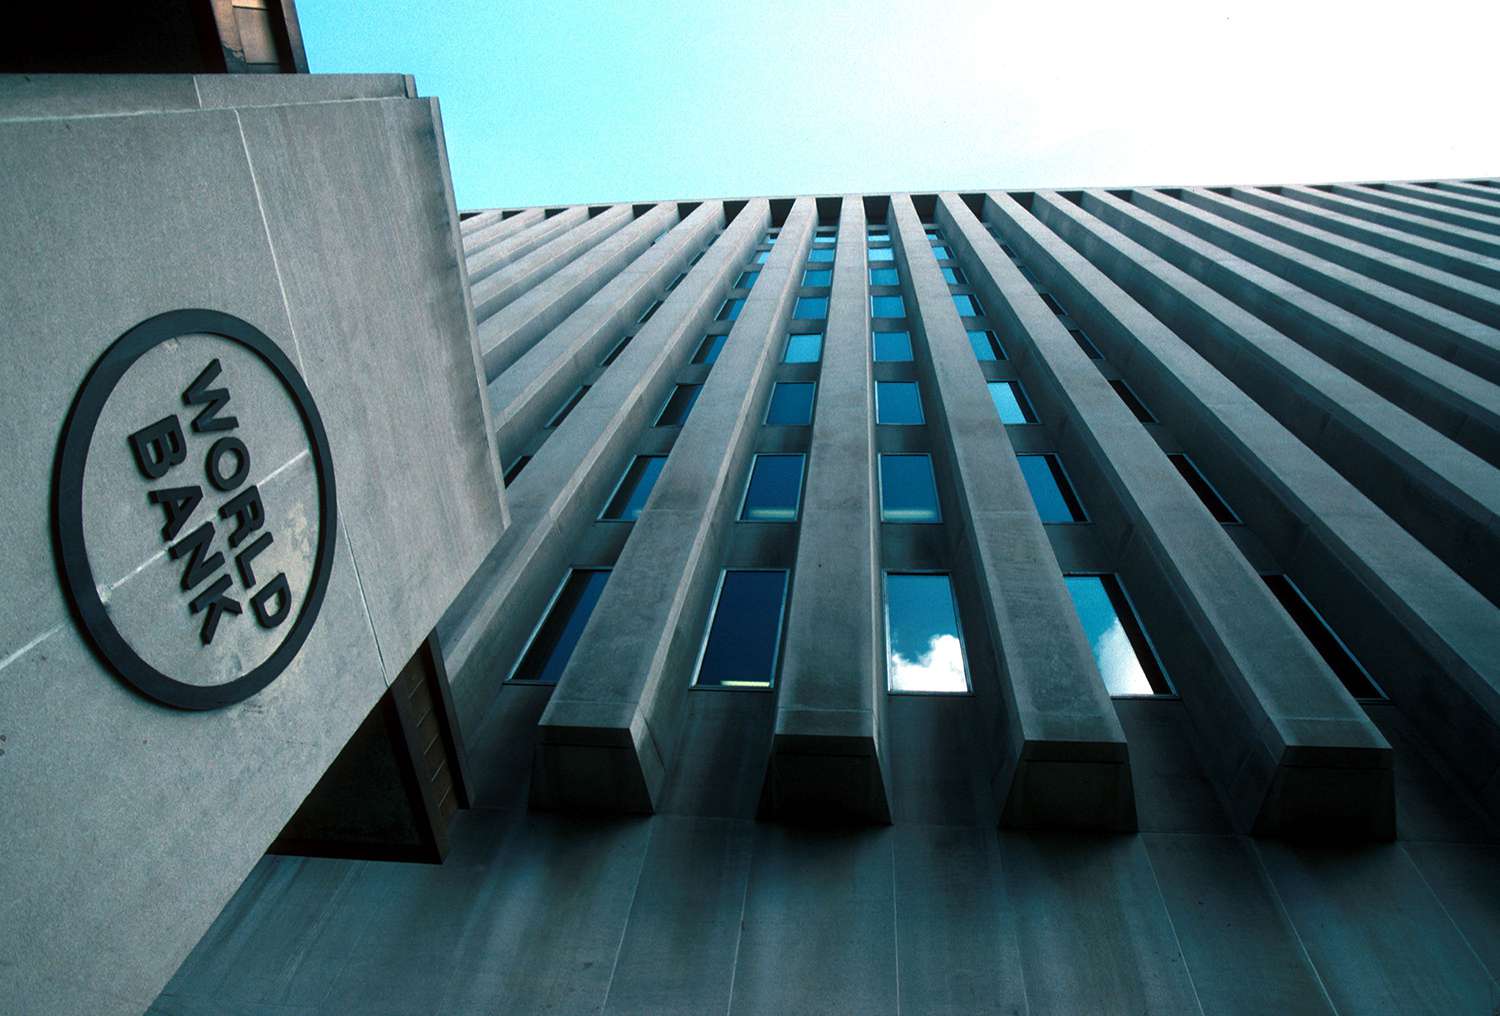 Ukraine will receive additional financing from the World Bank